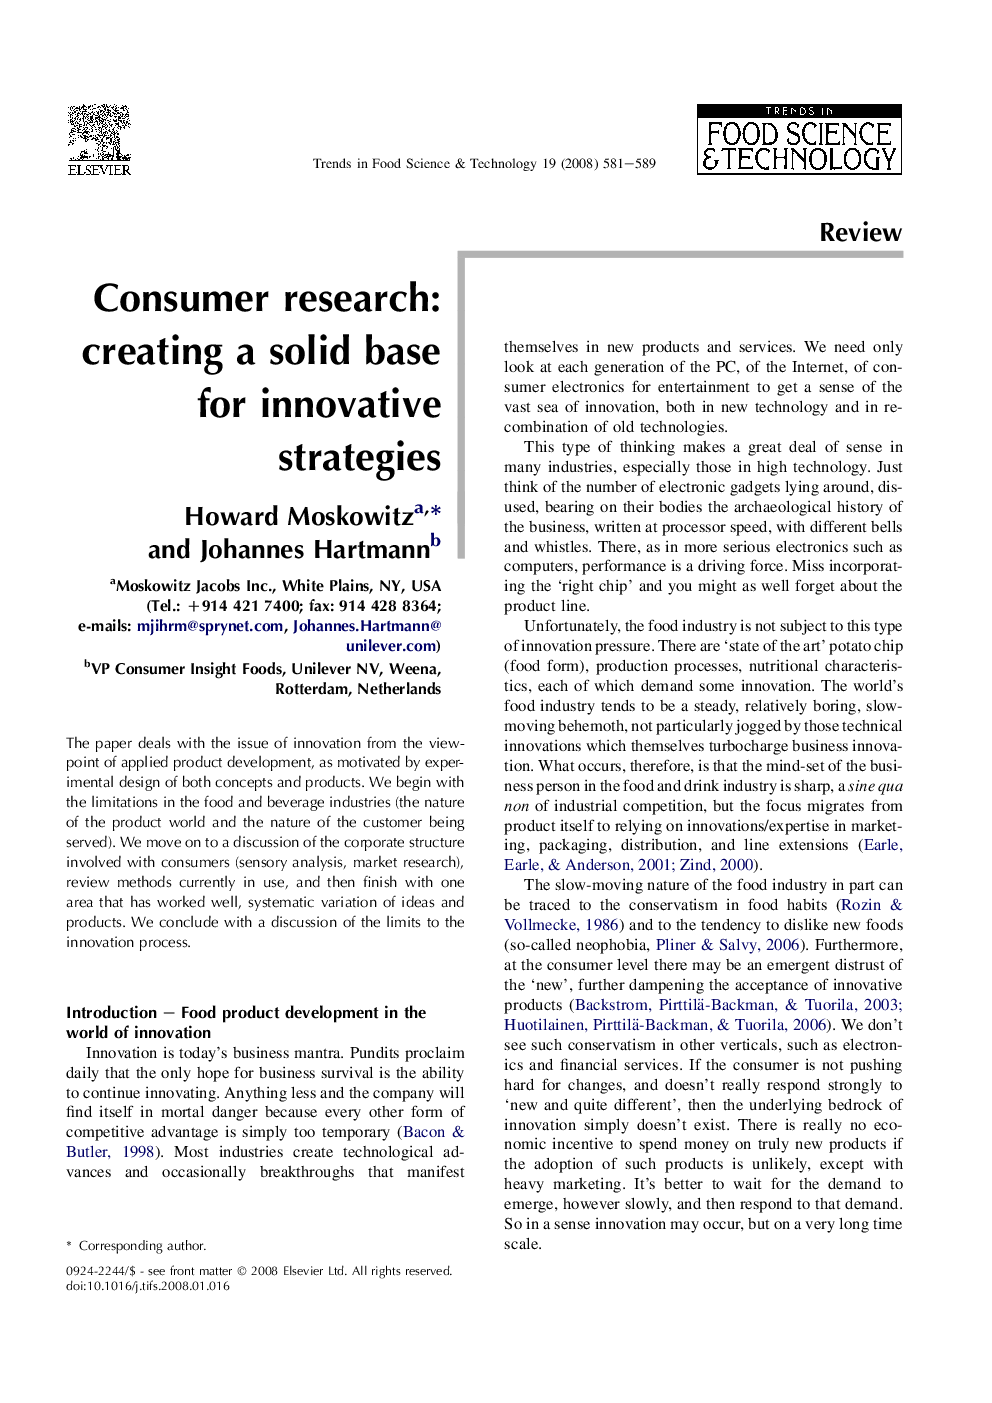 Consumer research: creating a solid base for innovative strategies